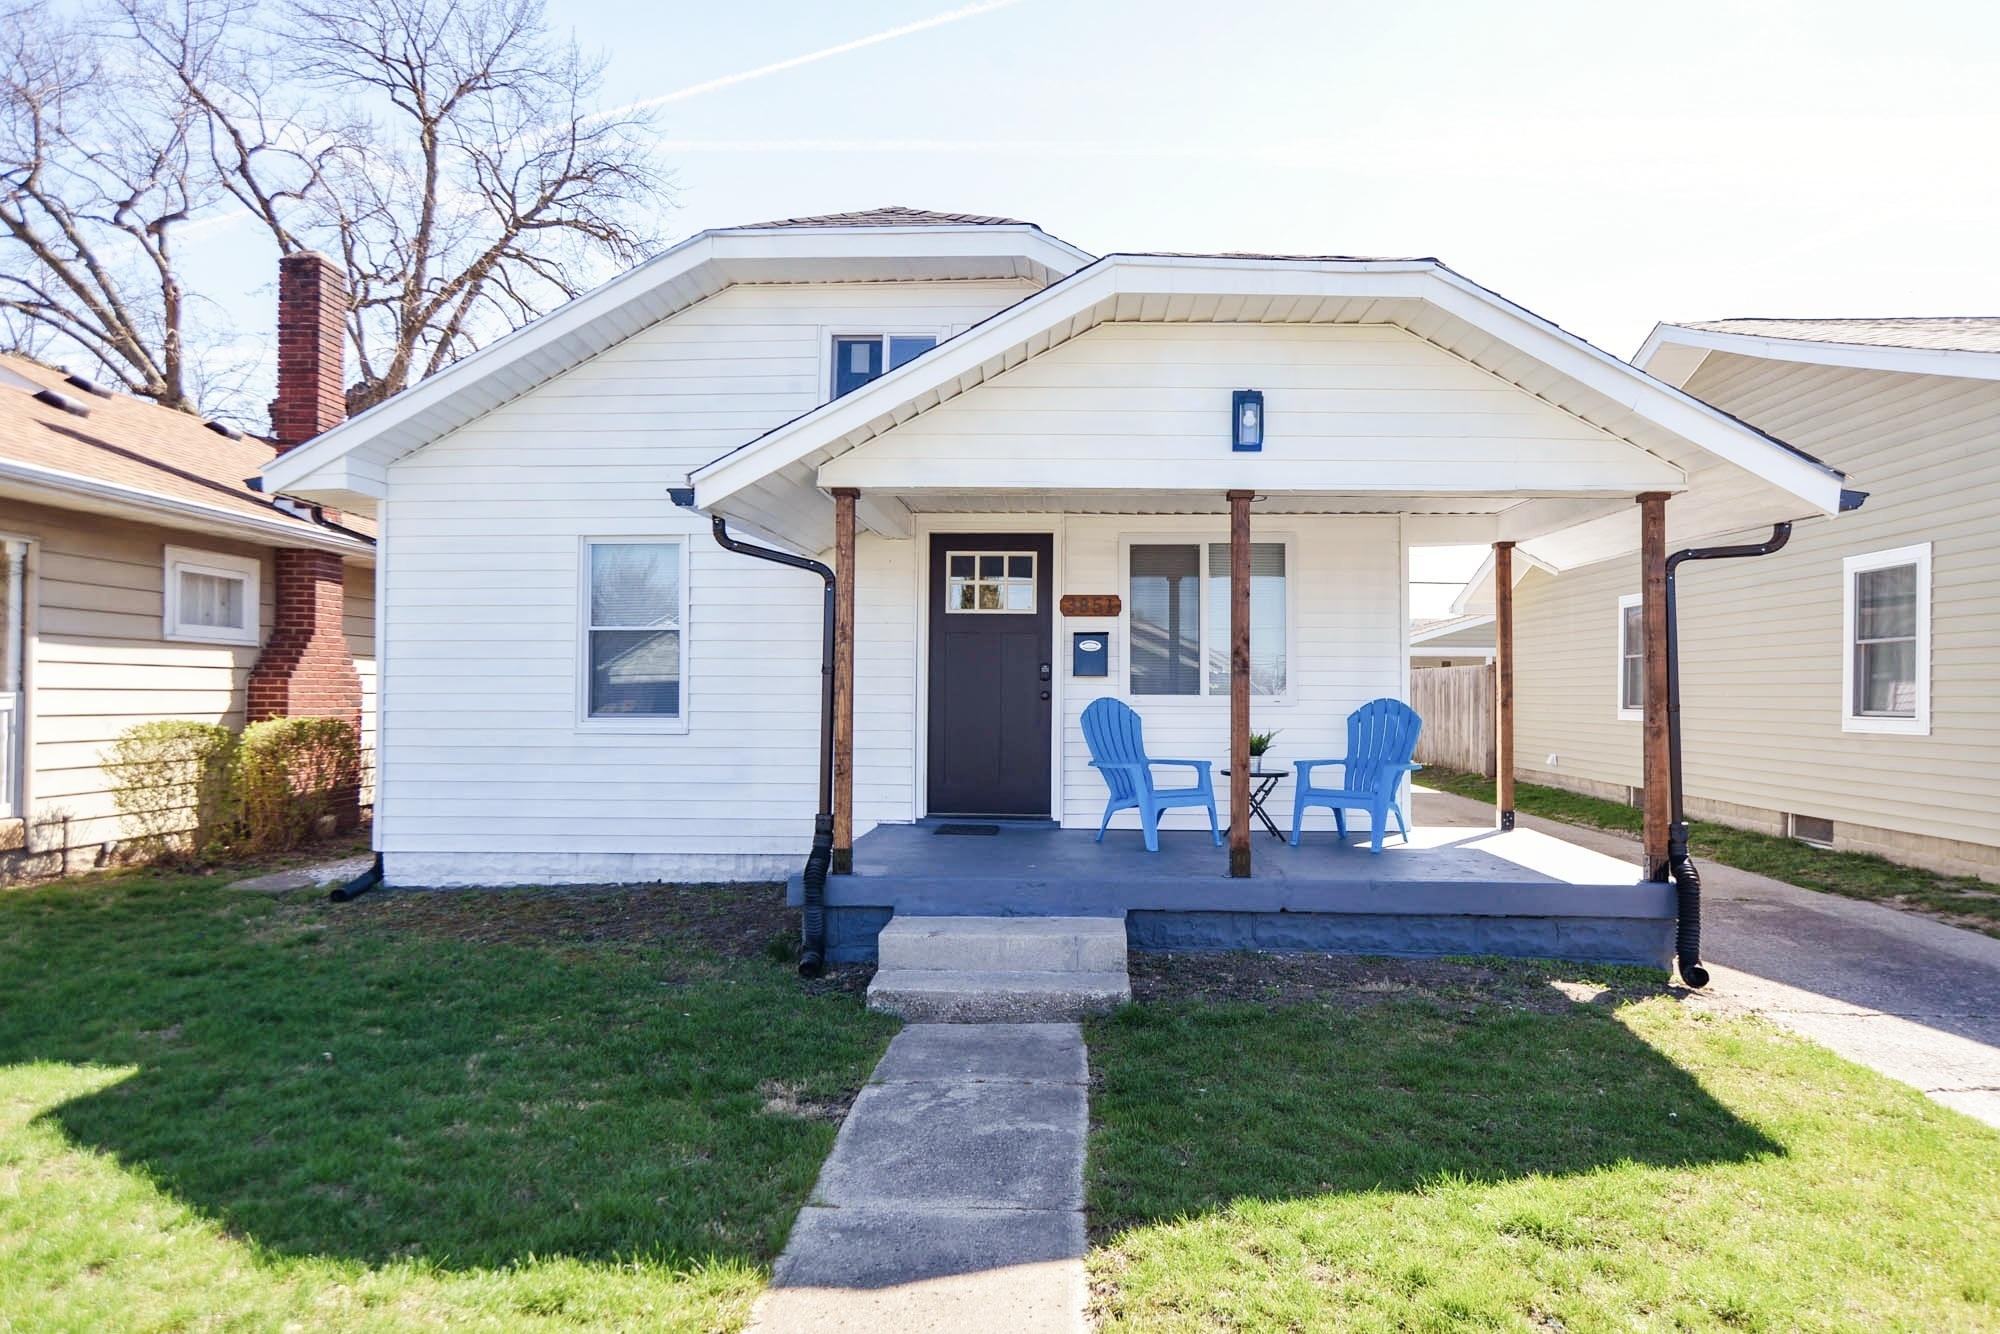 Photo one of 3851 Fletcher Ave Indianapolis IN 46203 | MLS 21969843